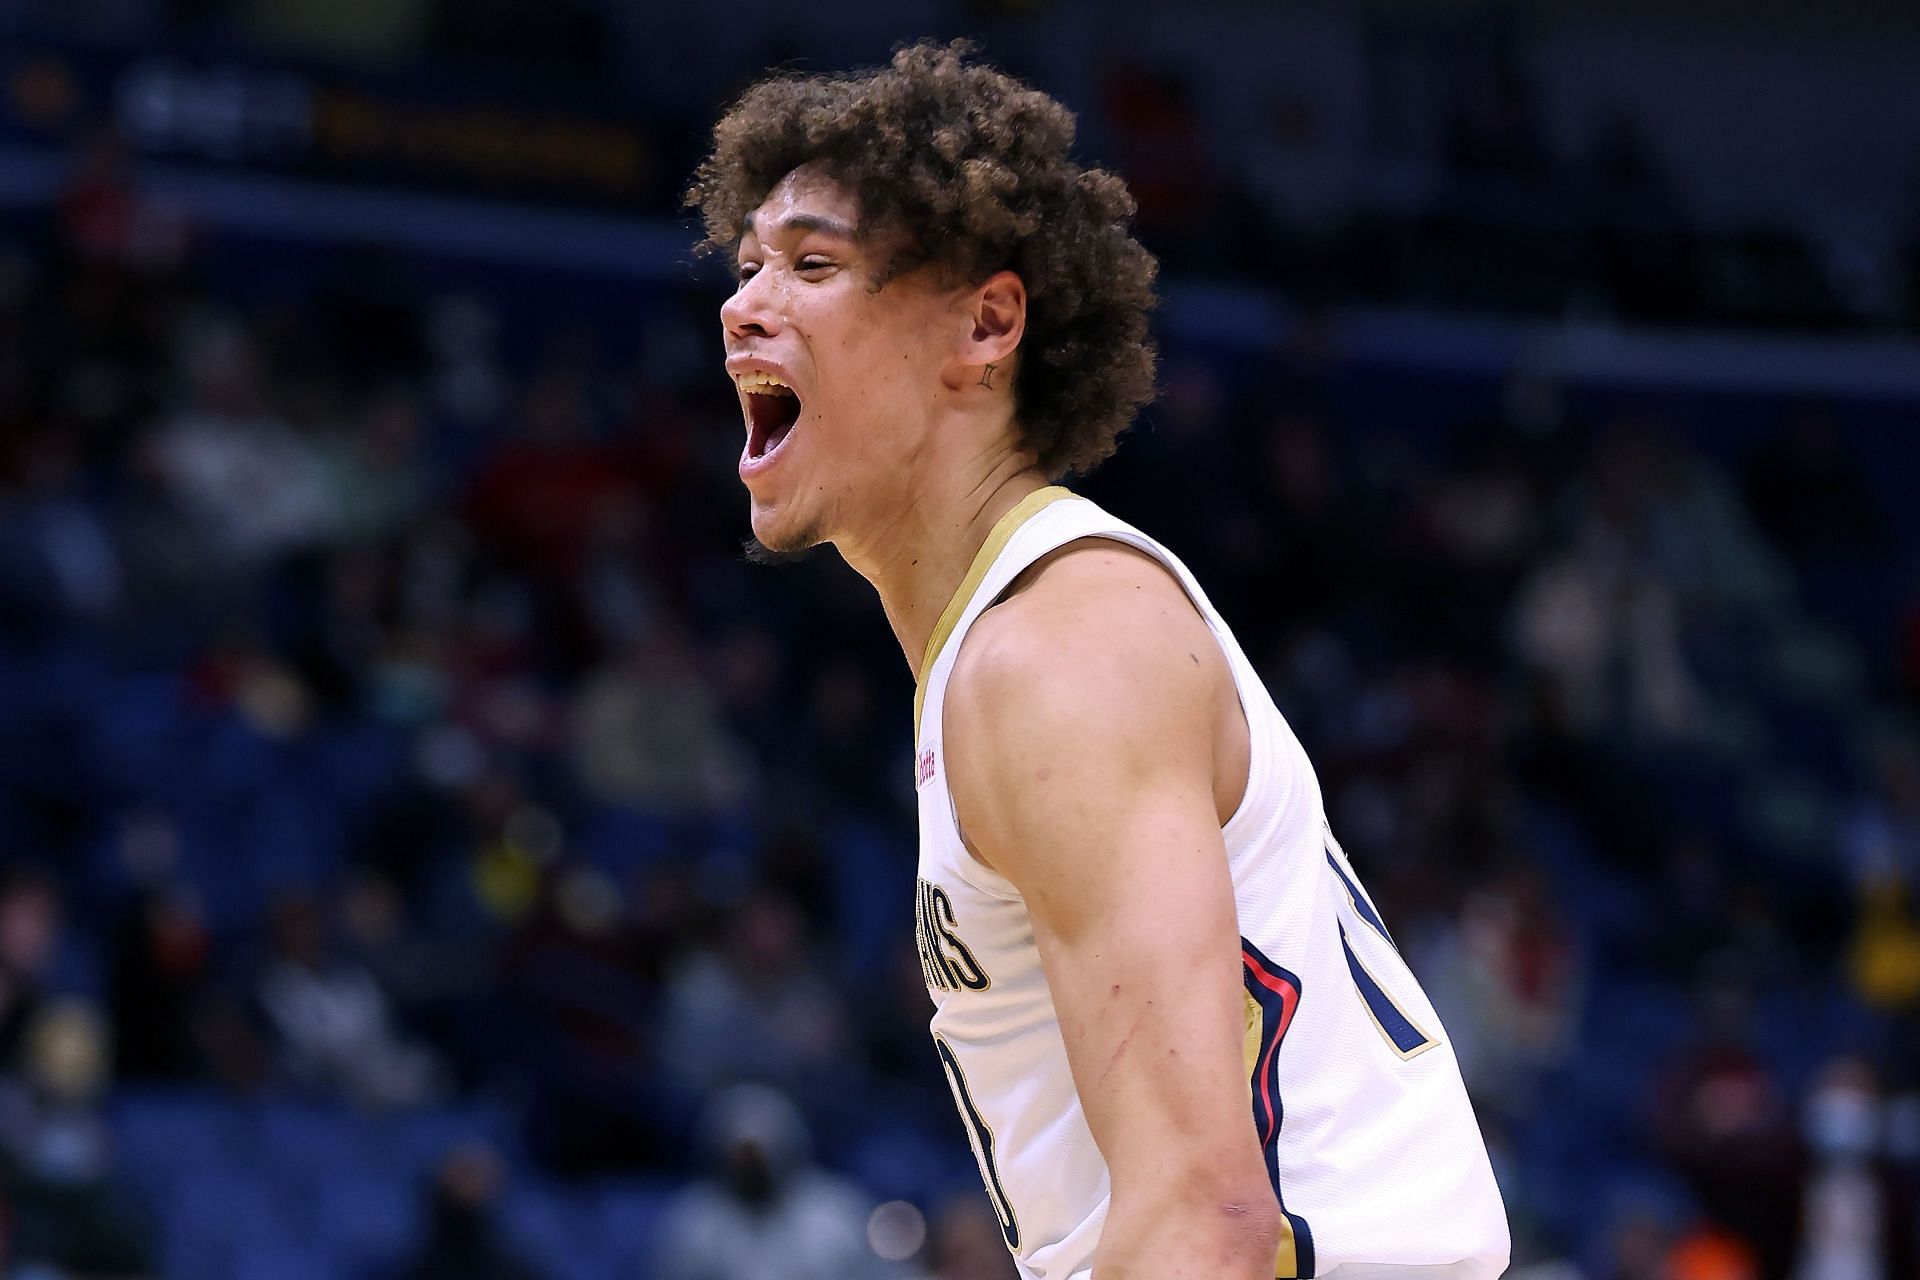 Jaxson Hayes of the New Orleans Pelicans